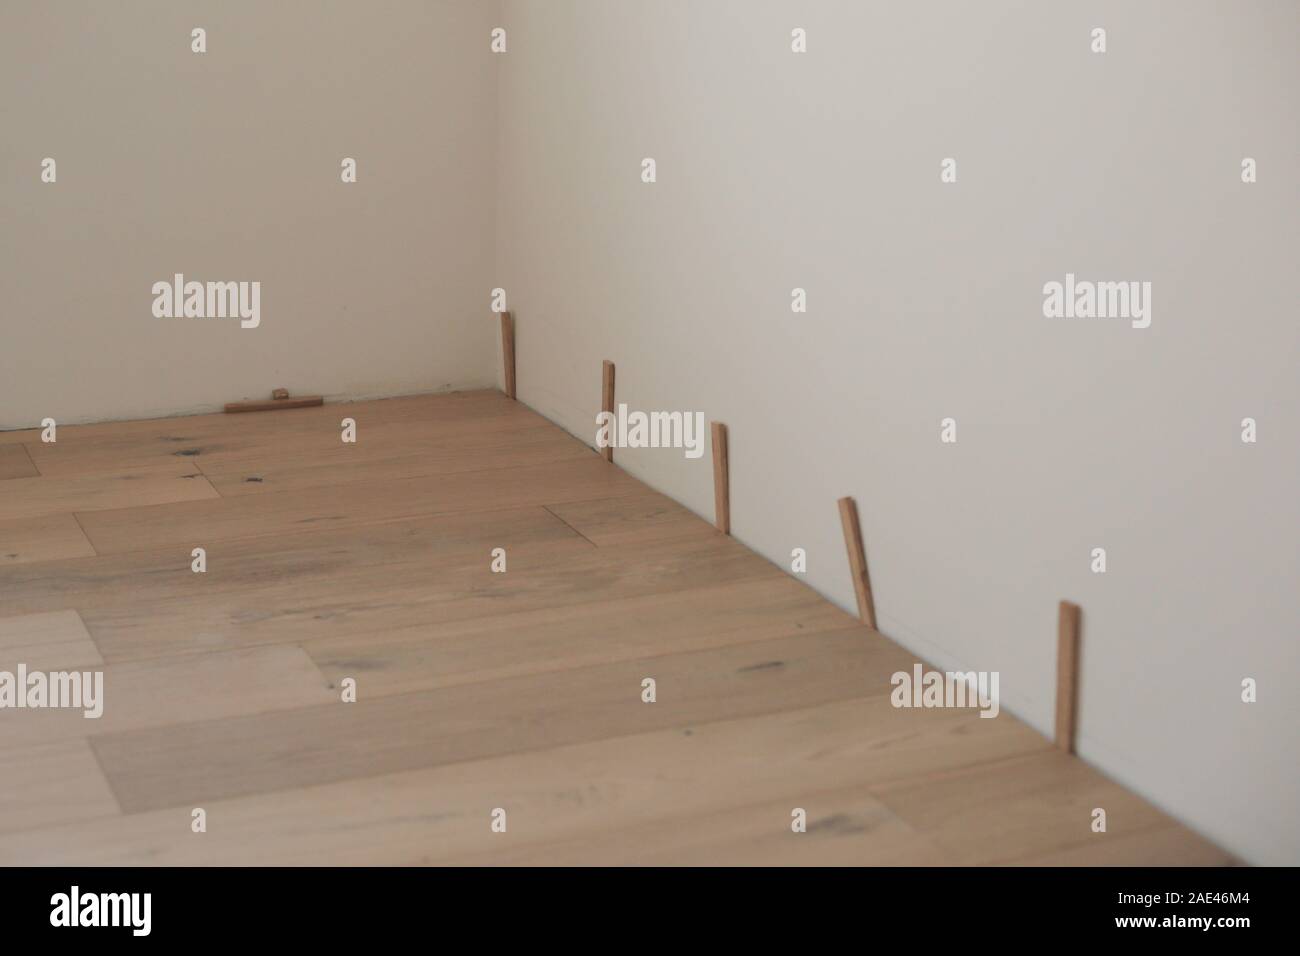 New Laminate or Parquet floor Installation in home house Stock Photo